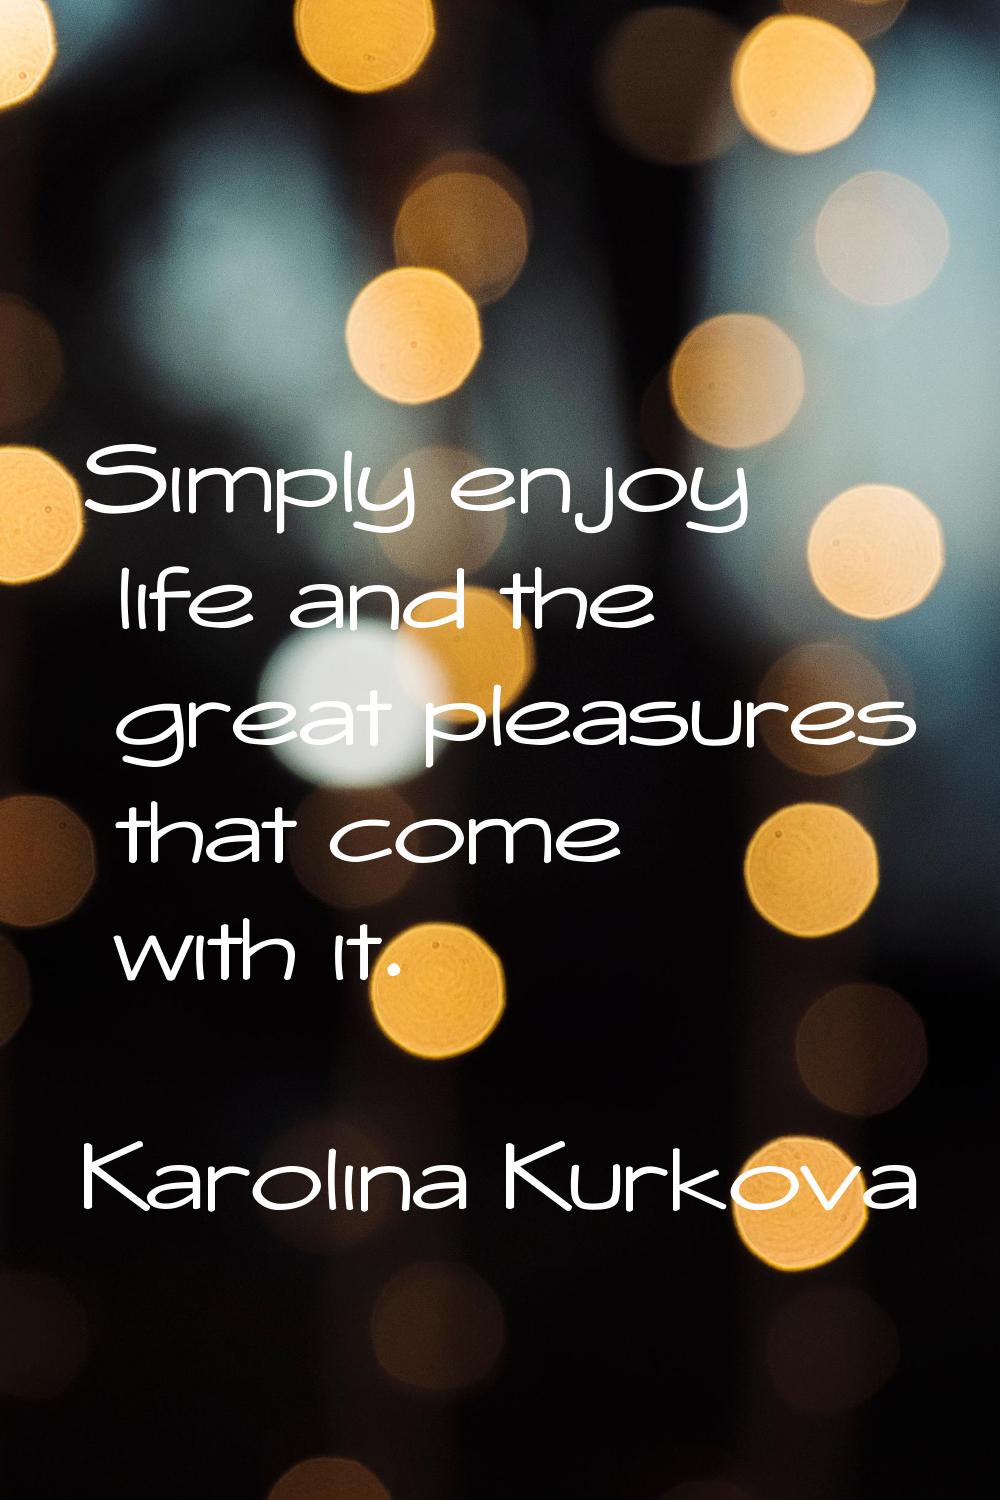 Simply enjoy life and the great pleasures that come with it.